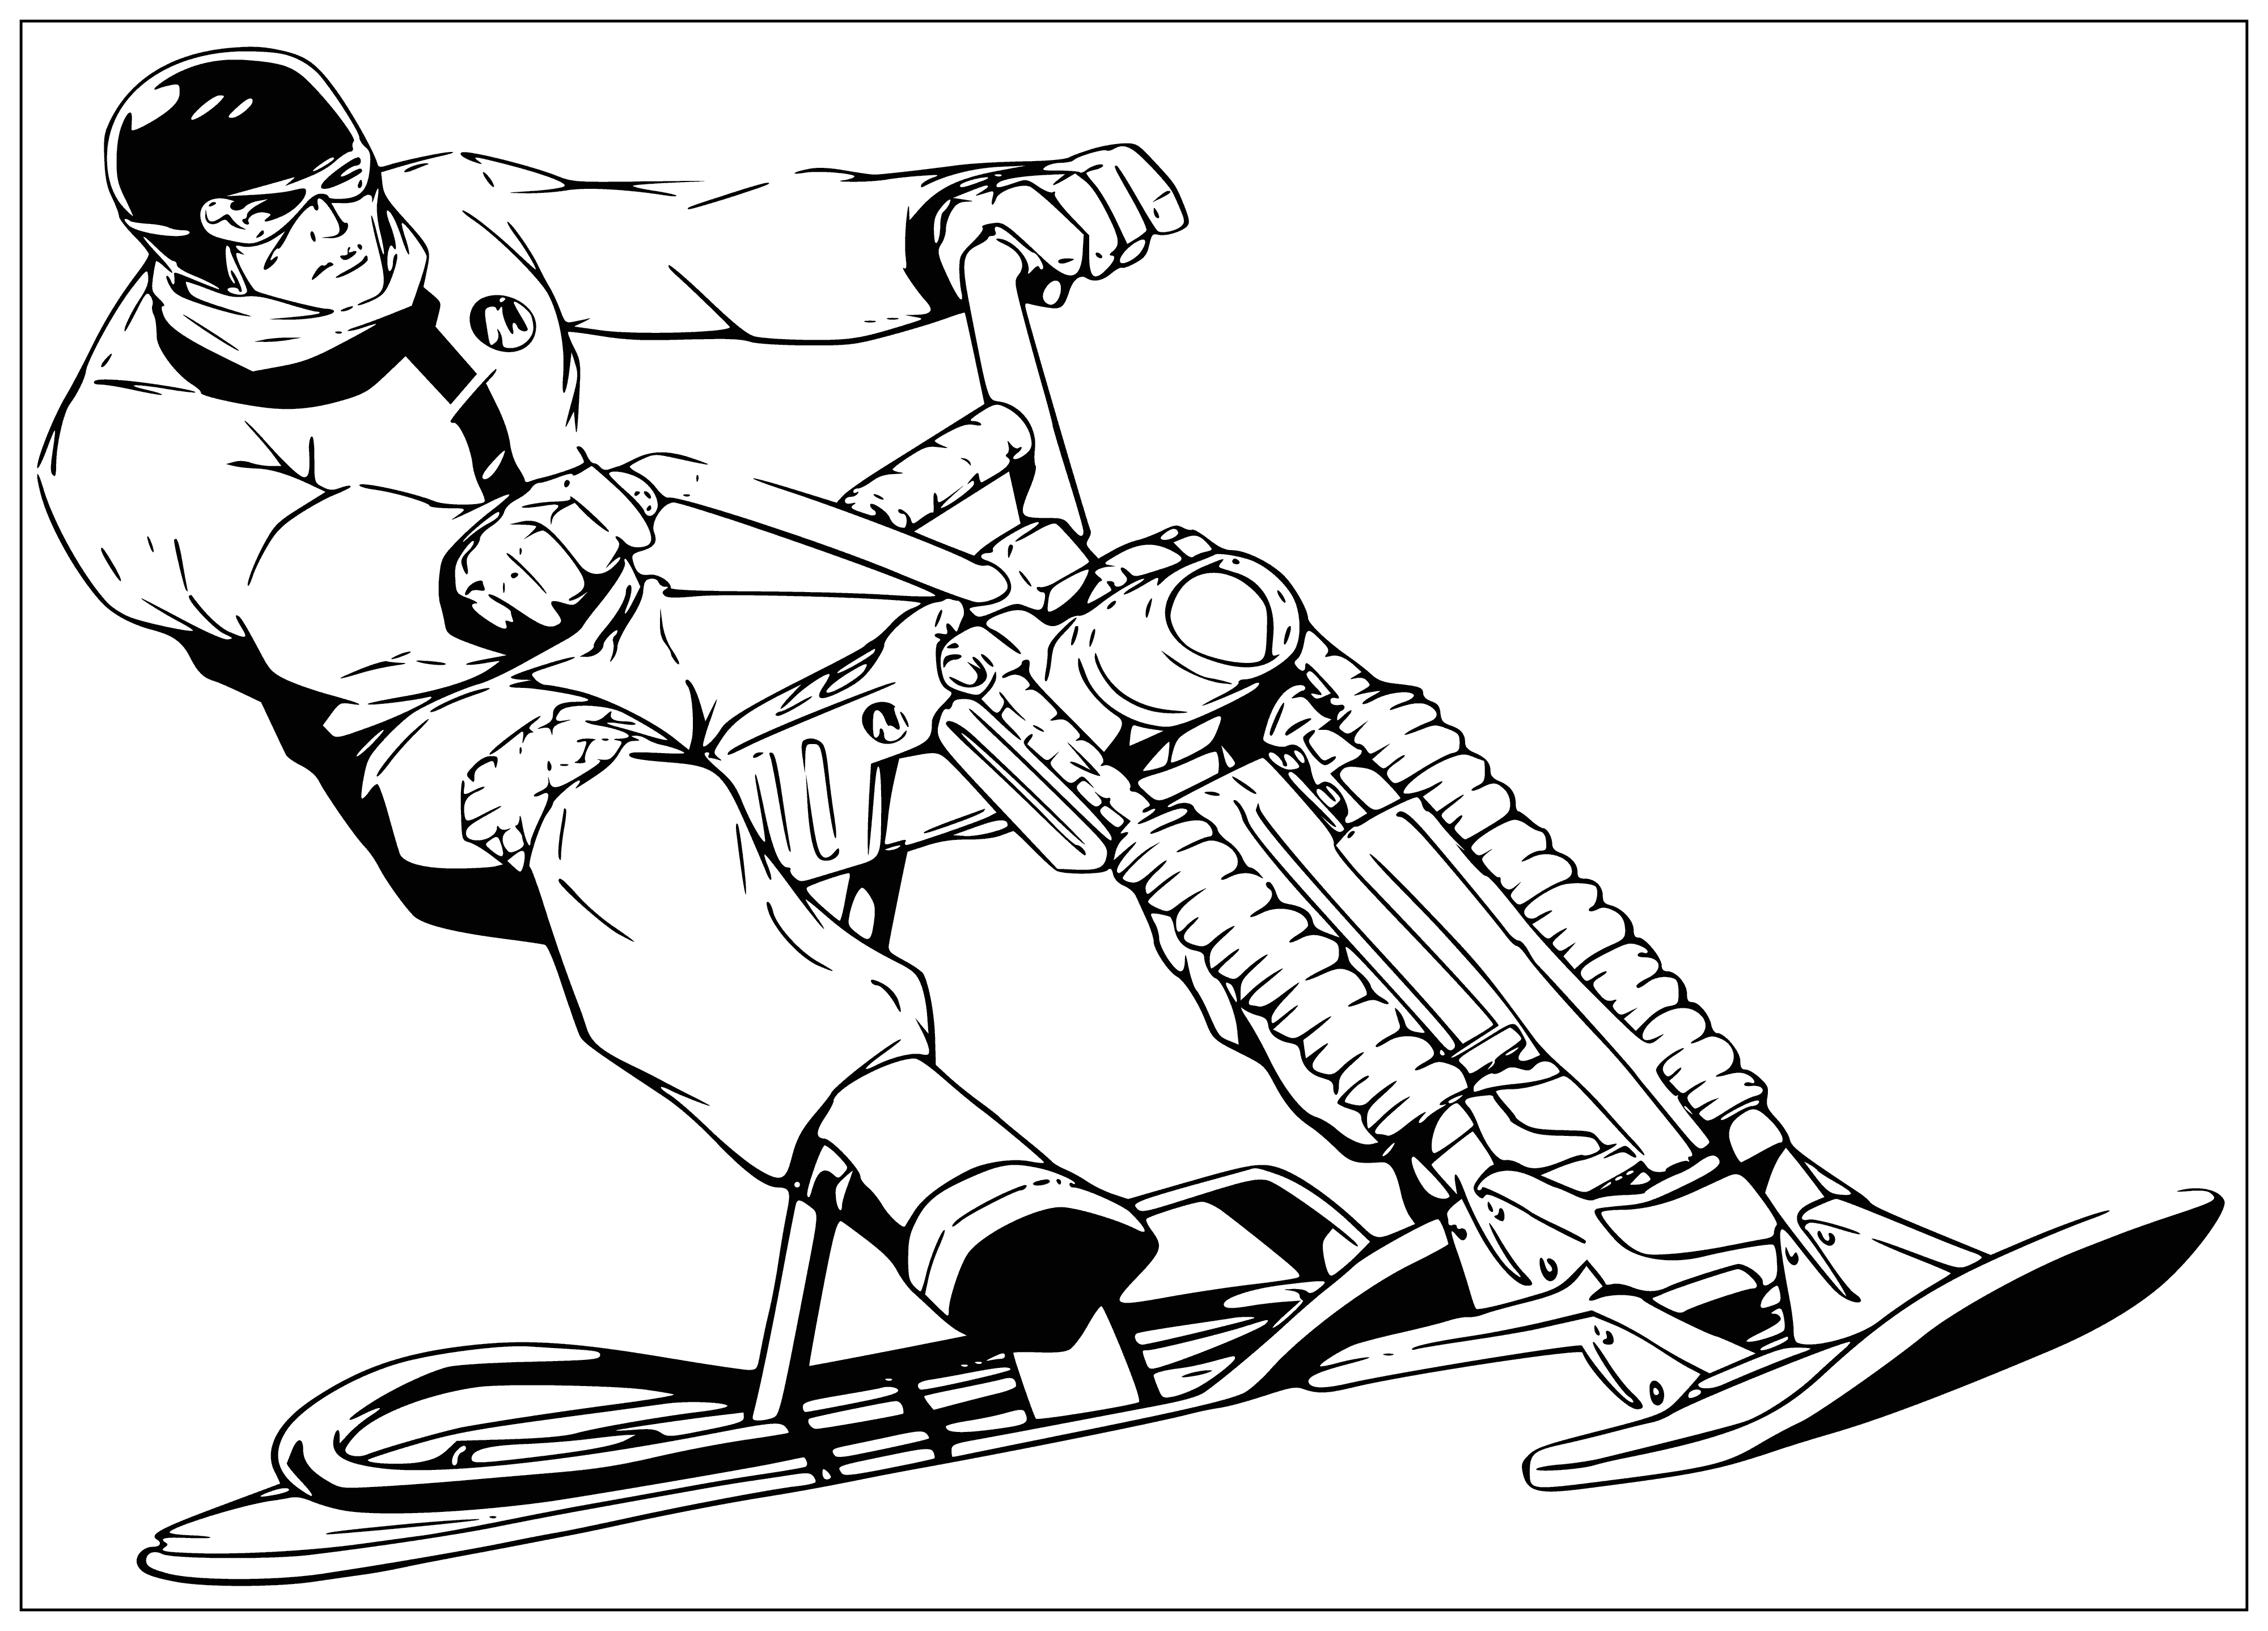 coloring page: ActionMan drives snowmobile, waving, surrounded by snowy field & Christmas tree.